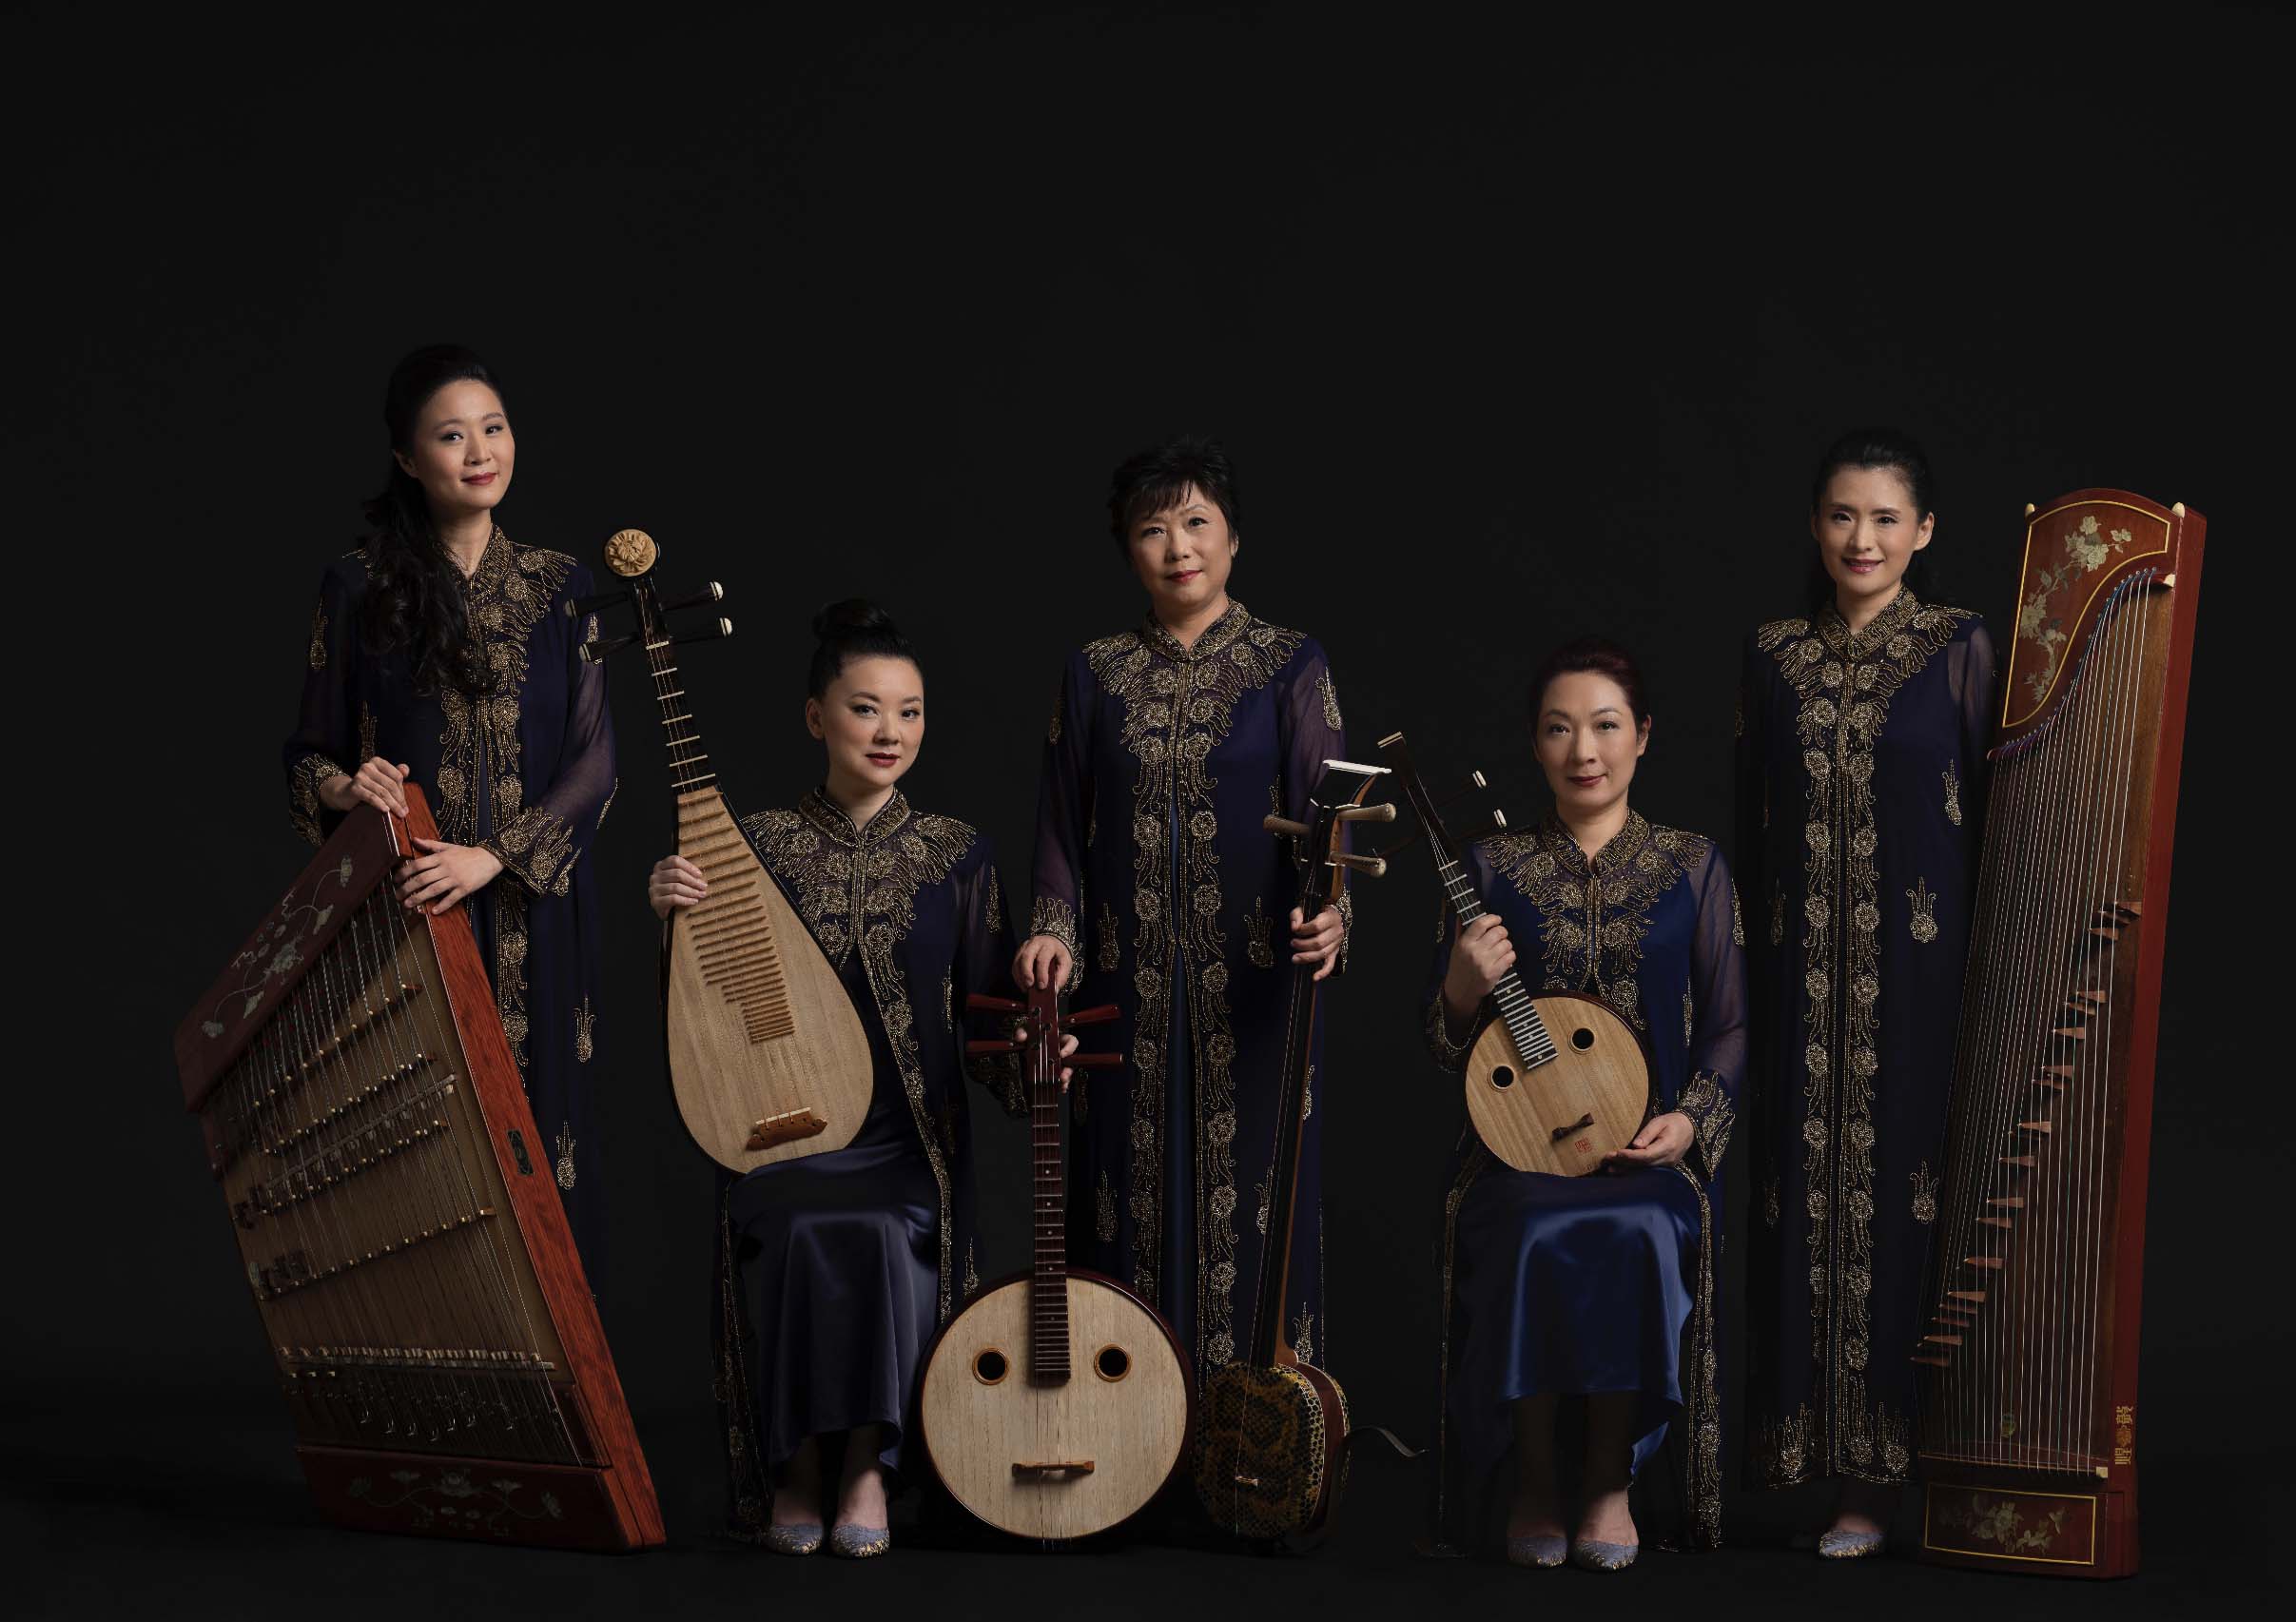 singapore chinese orchestra in traditional costumes and instruments group portrait